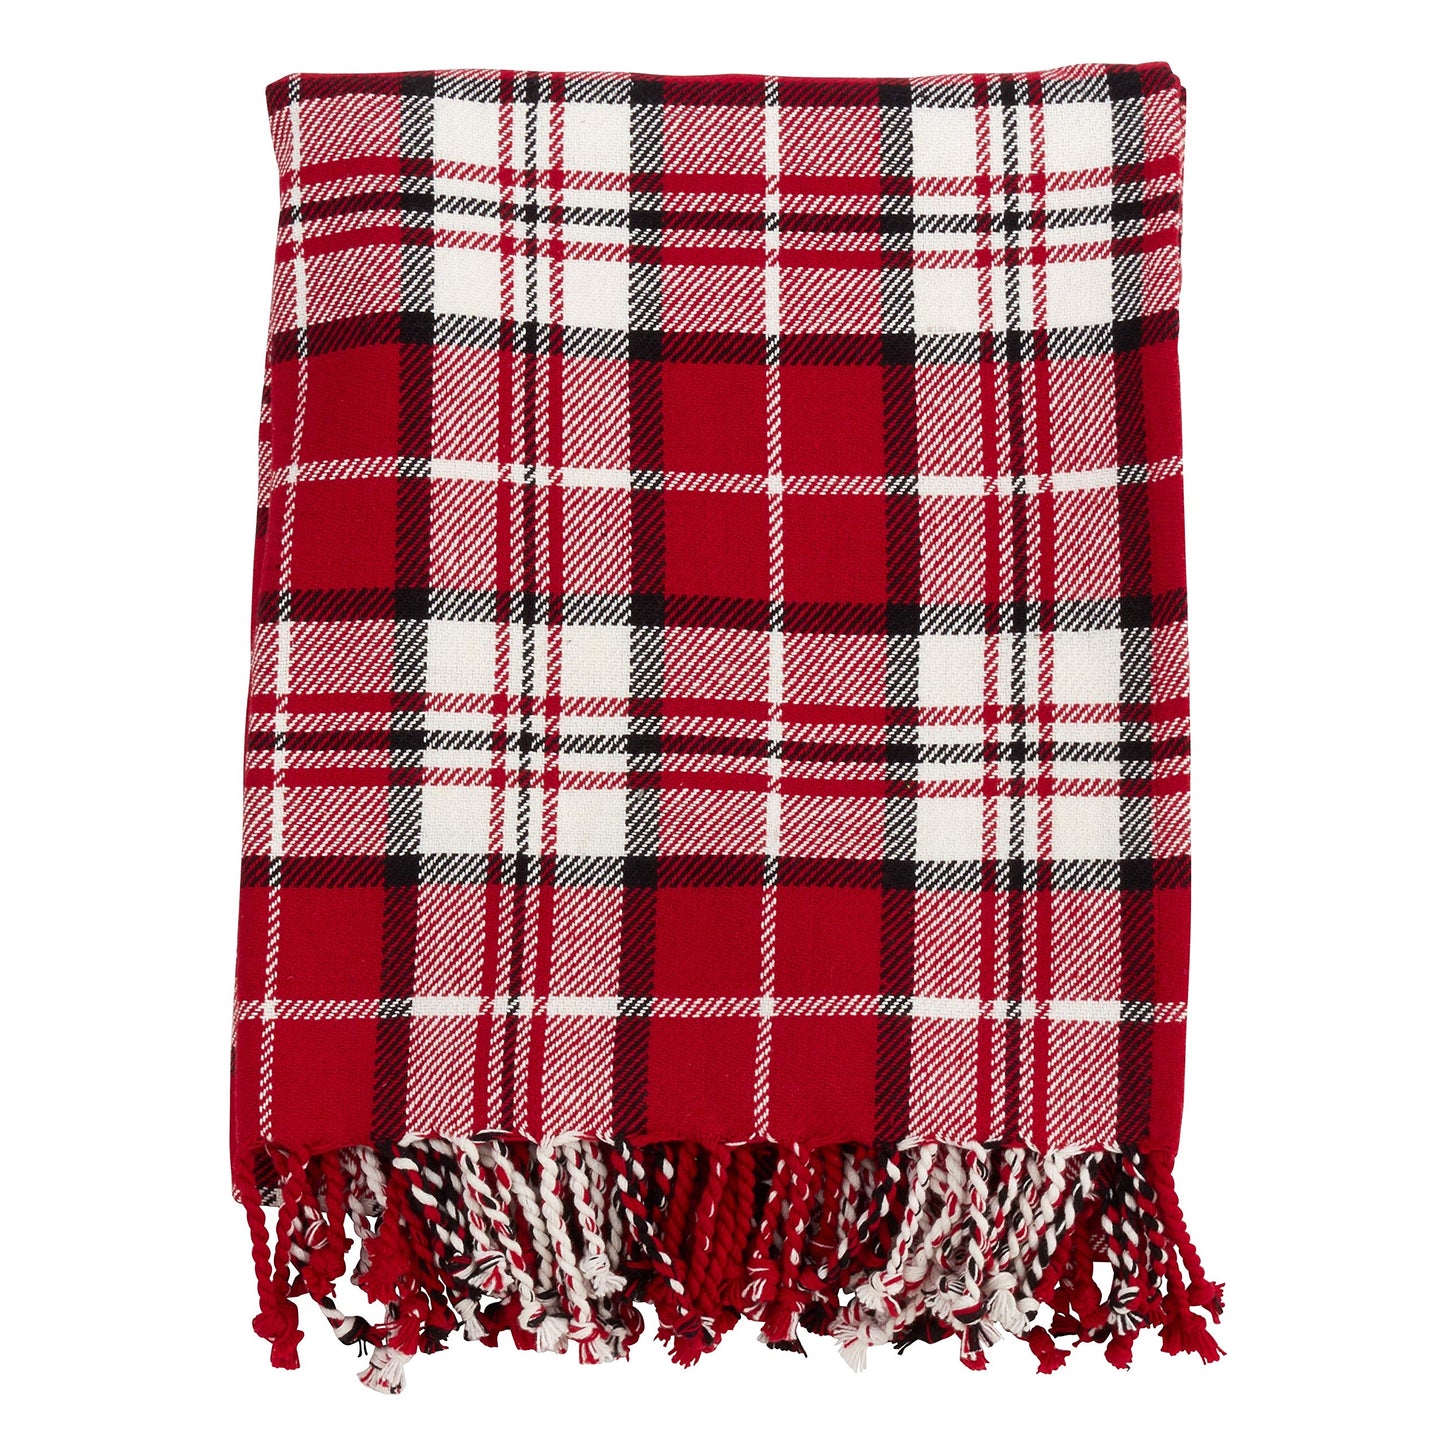 Fennco Styles Country Plaid Tassel 100% Cotton Throw 50 x 60 Inch - Black Red Blanket for Couch, Living Room, Bedroom, Christmas Décor and Everyday Use